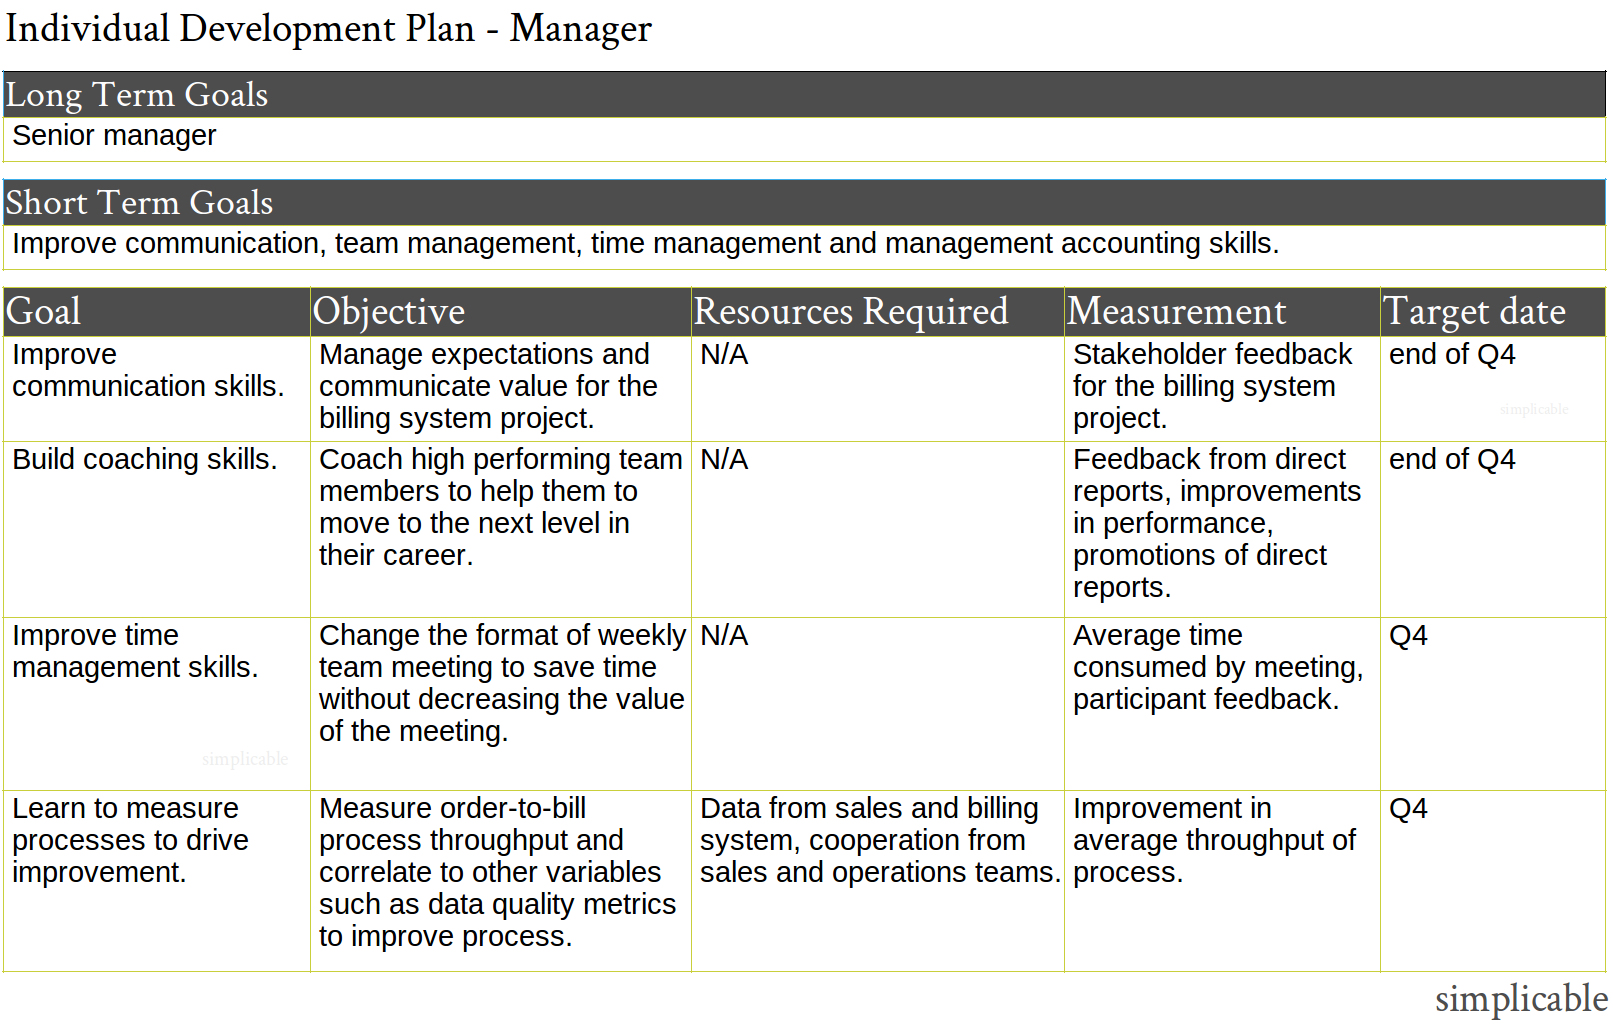 Example individual development plan for an operations manager.   This manager is happy in their current role and views the individual develop plan as a waste of time.  As such, they reuse their current performance objectives to show how these will improve their skills.